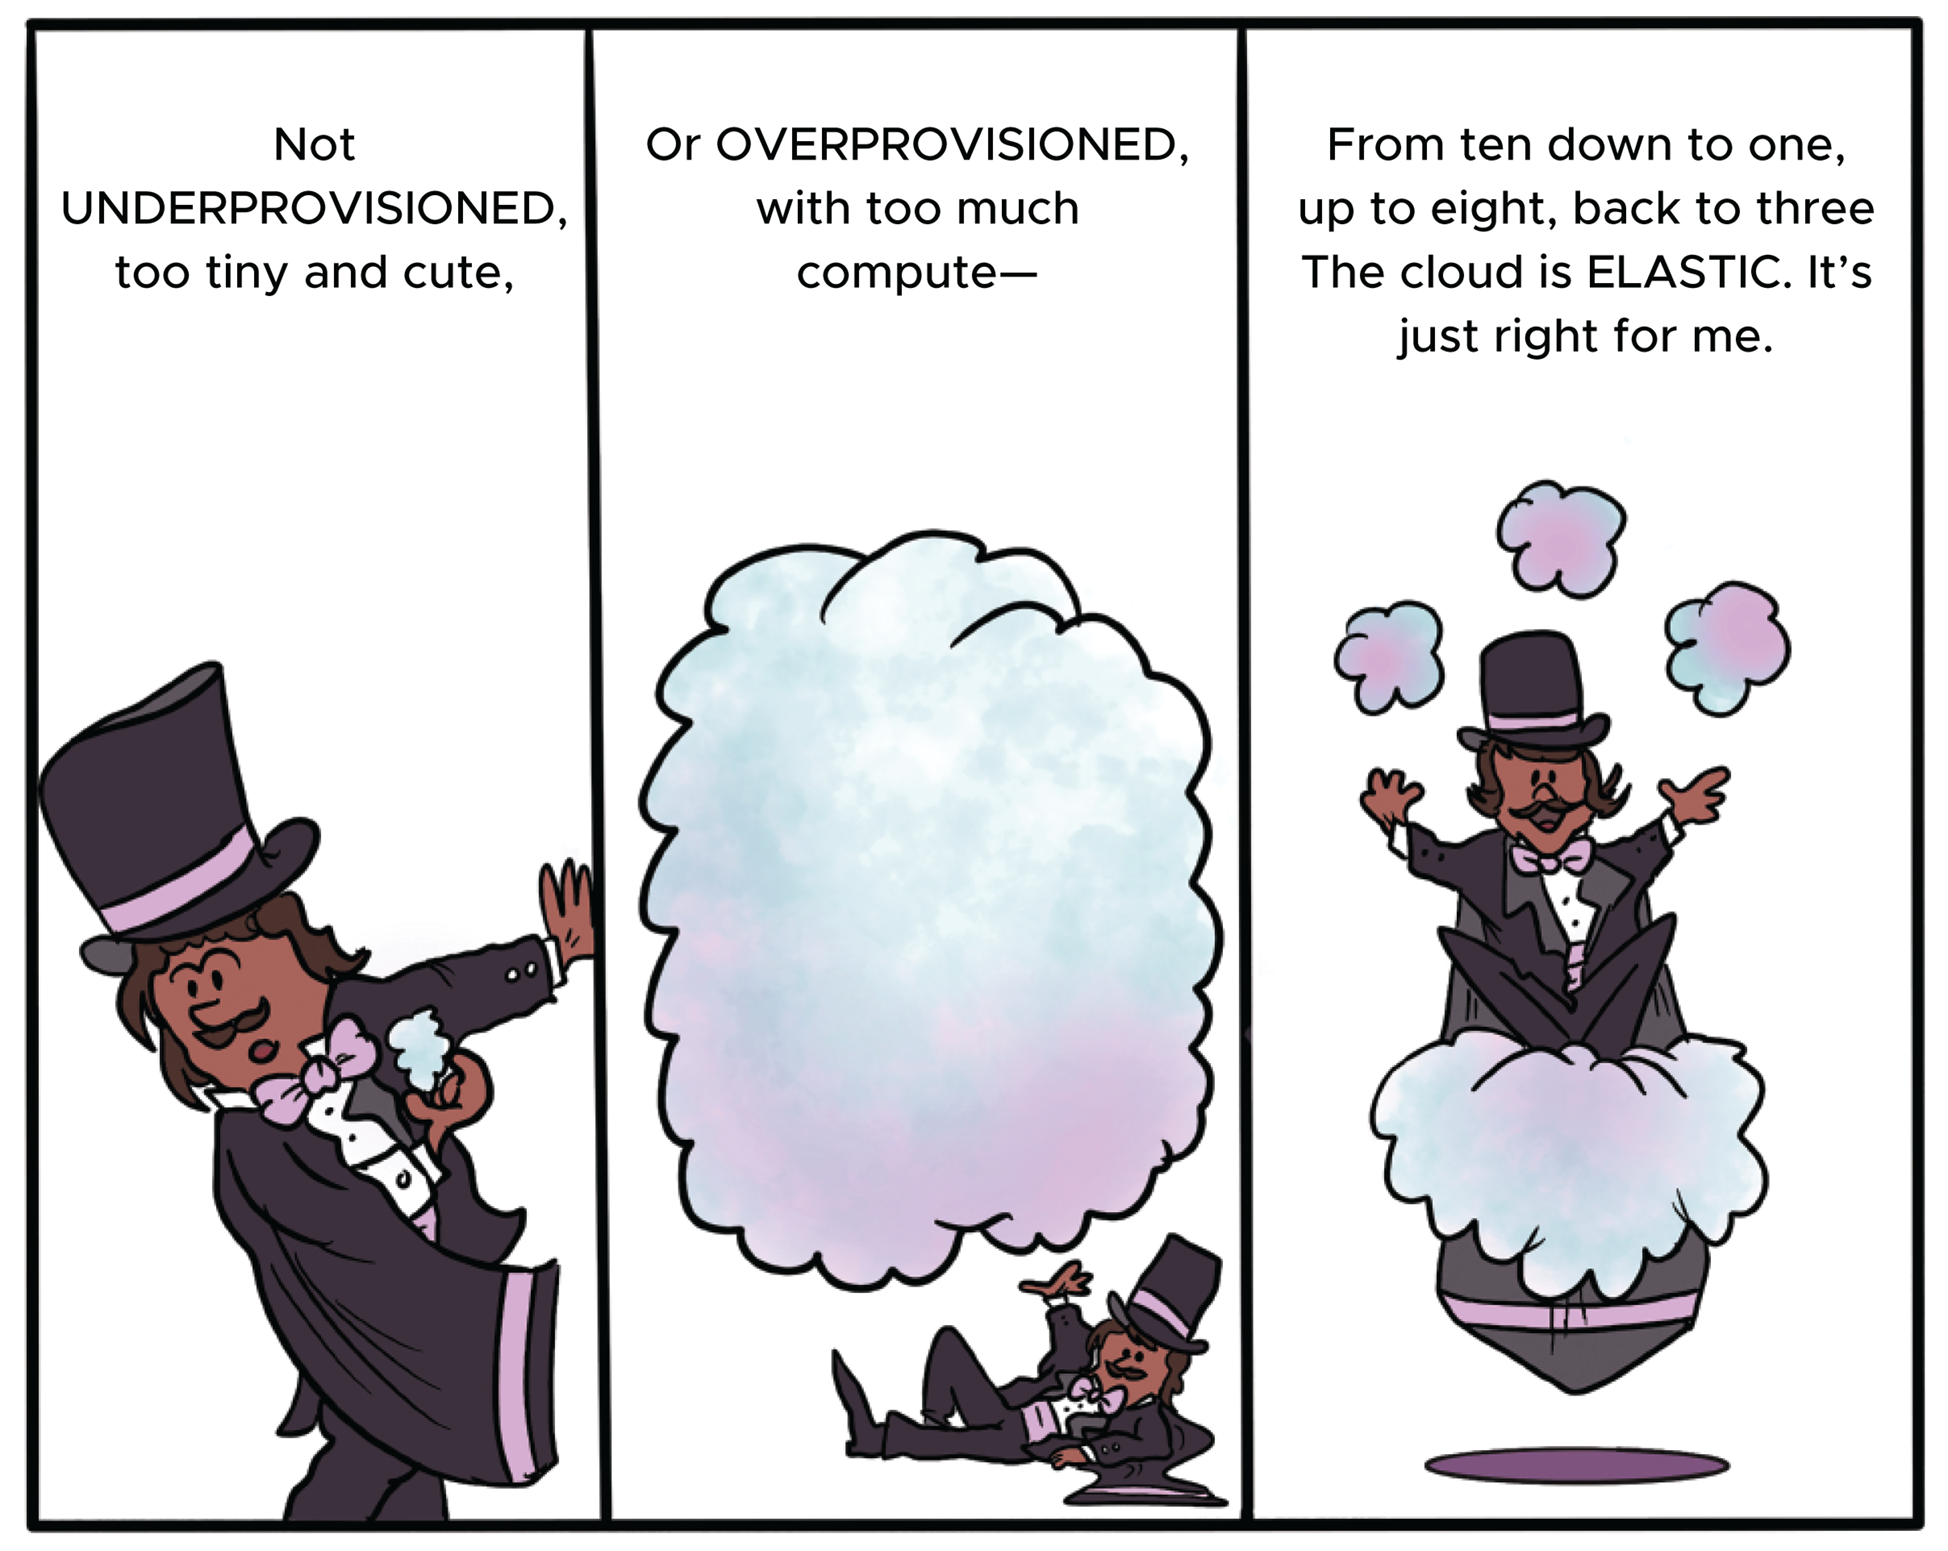 Cartoon illustration of a magician performing magic with clouds.